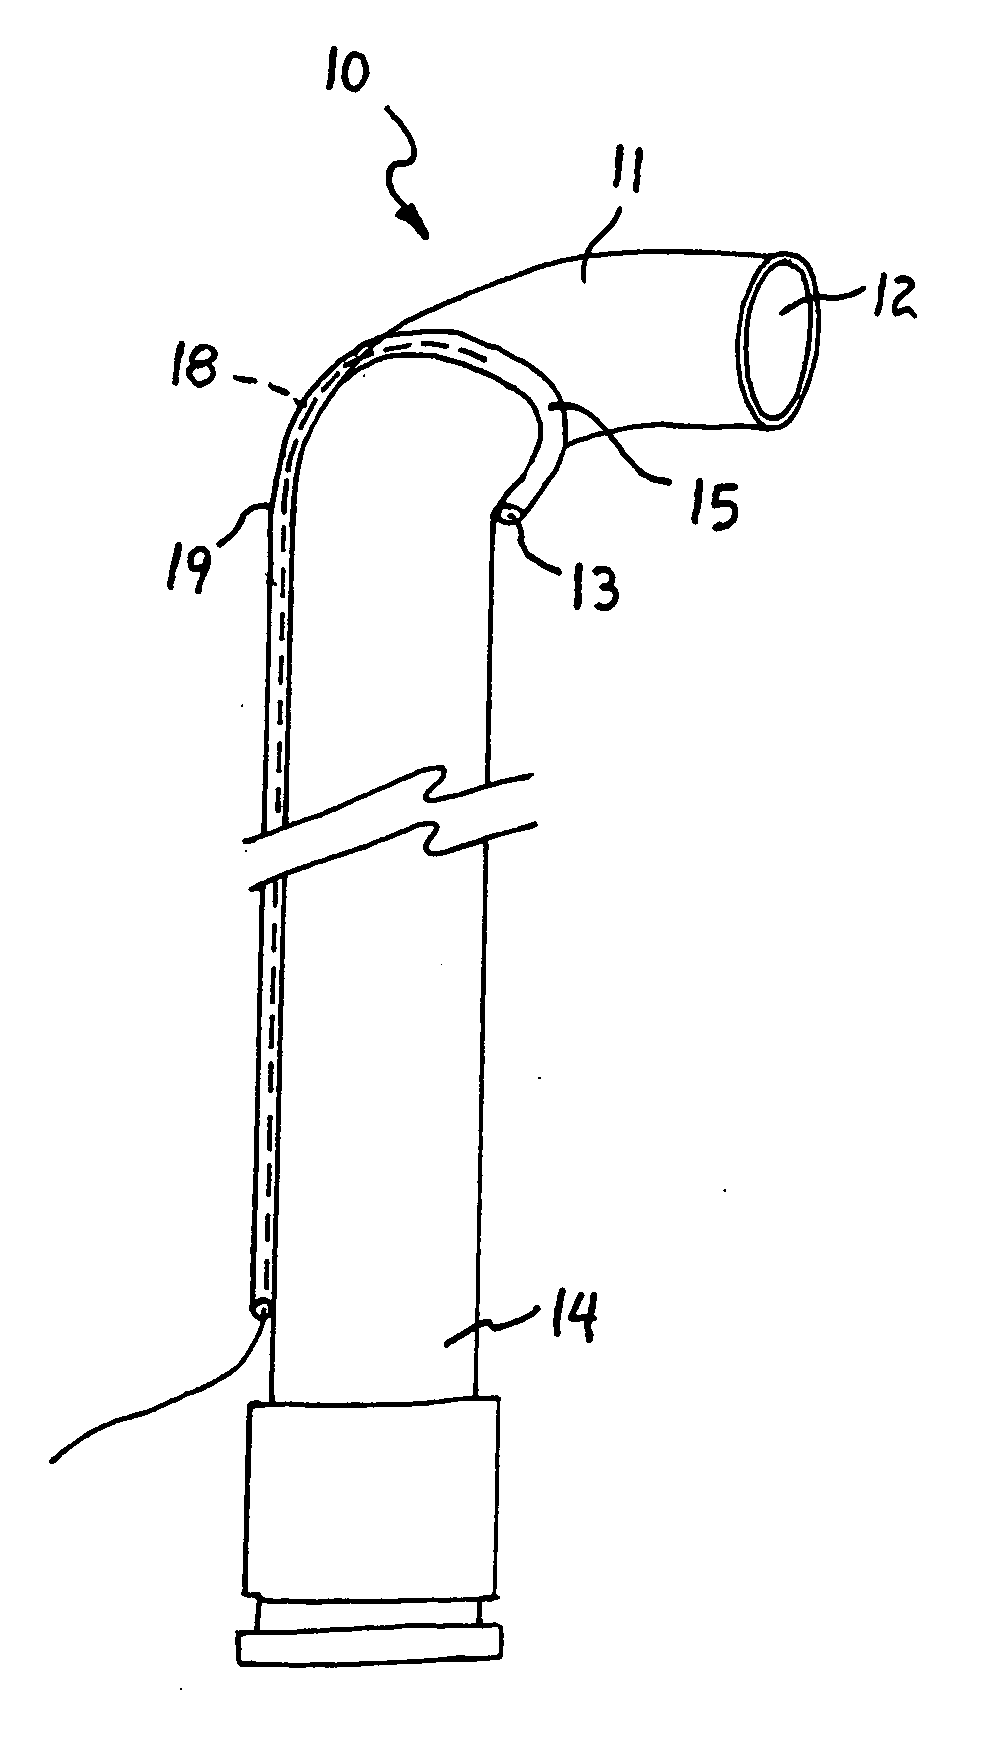 Method and apparatus for curving a catheter